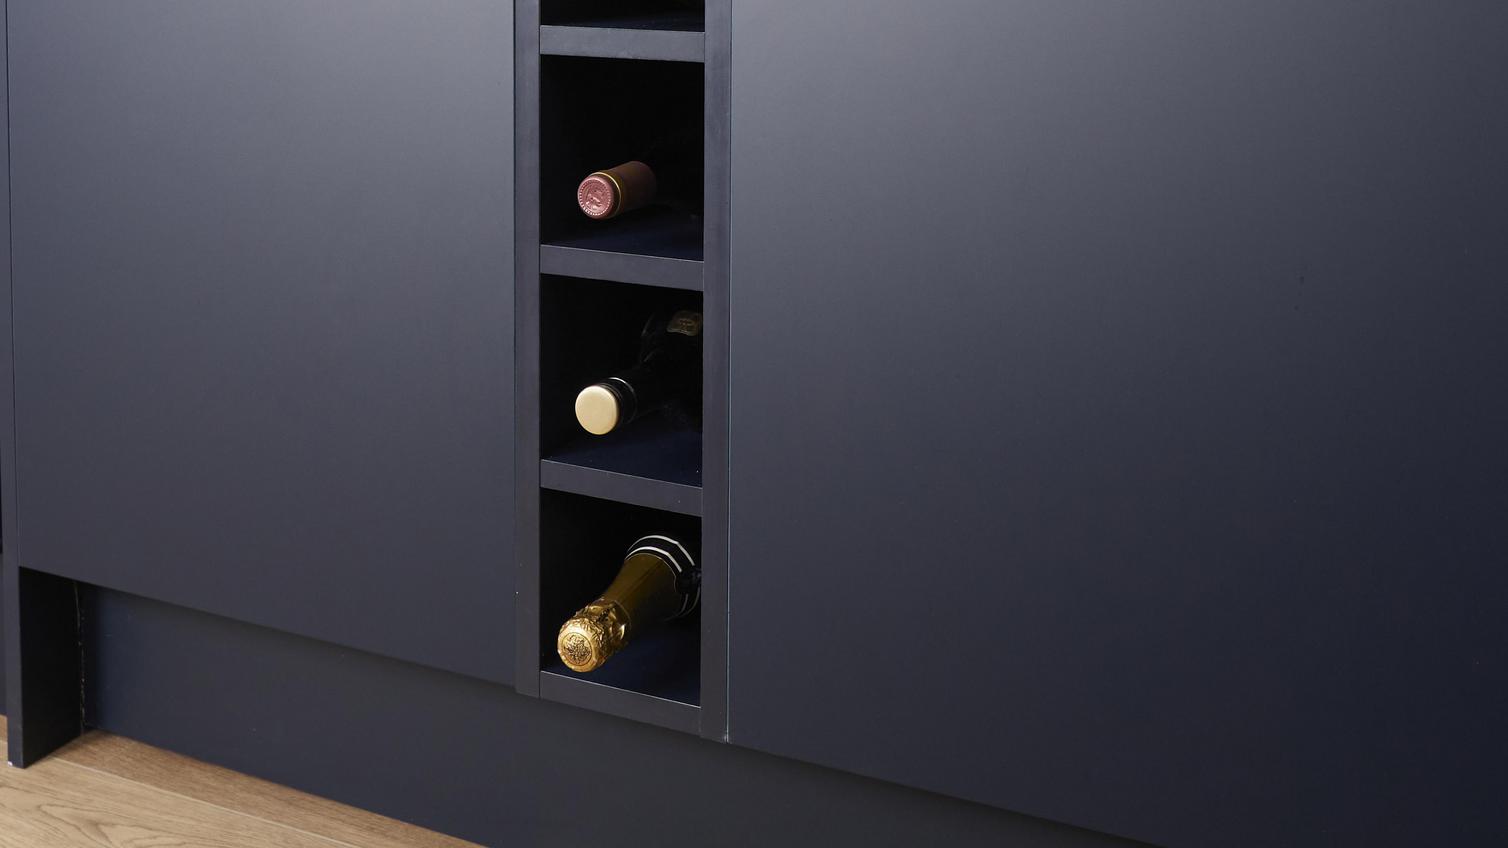 A slim wine rack, which is in a navy matt finish alongside matching kitchen doors. The rack holds 5 bottles of wine.